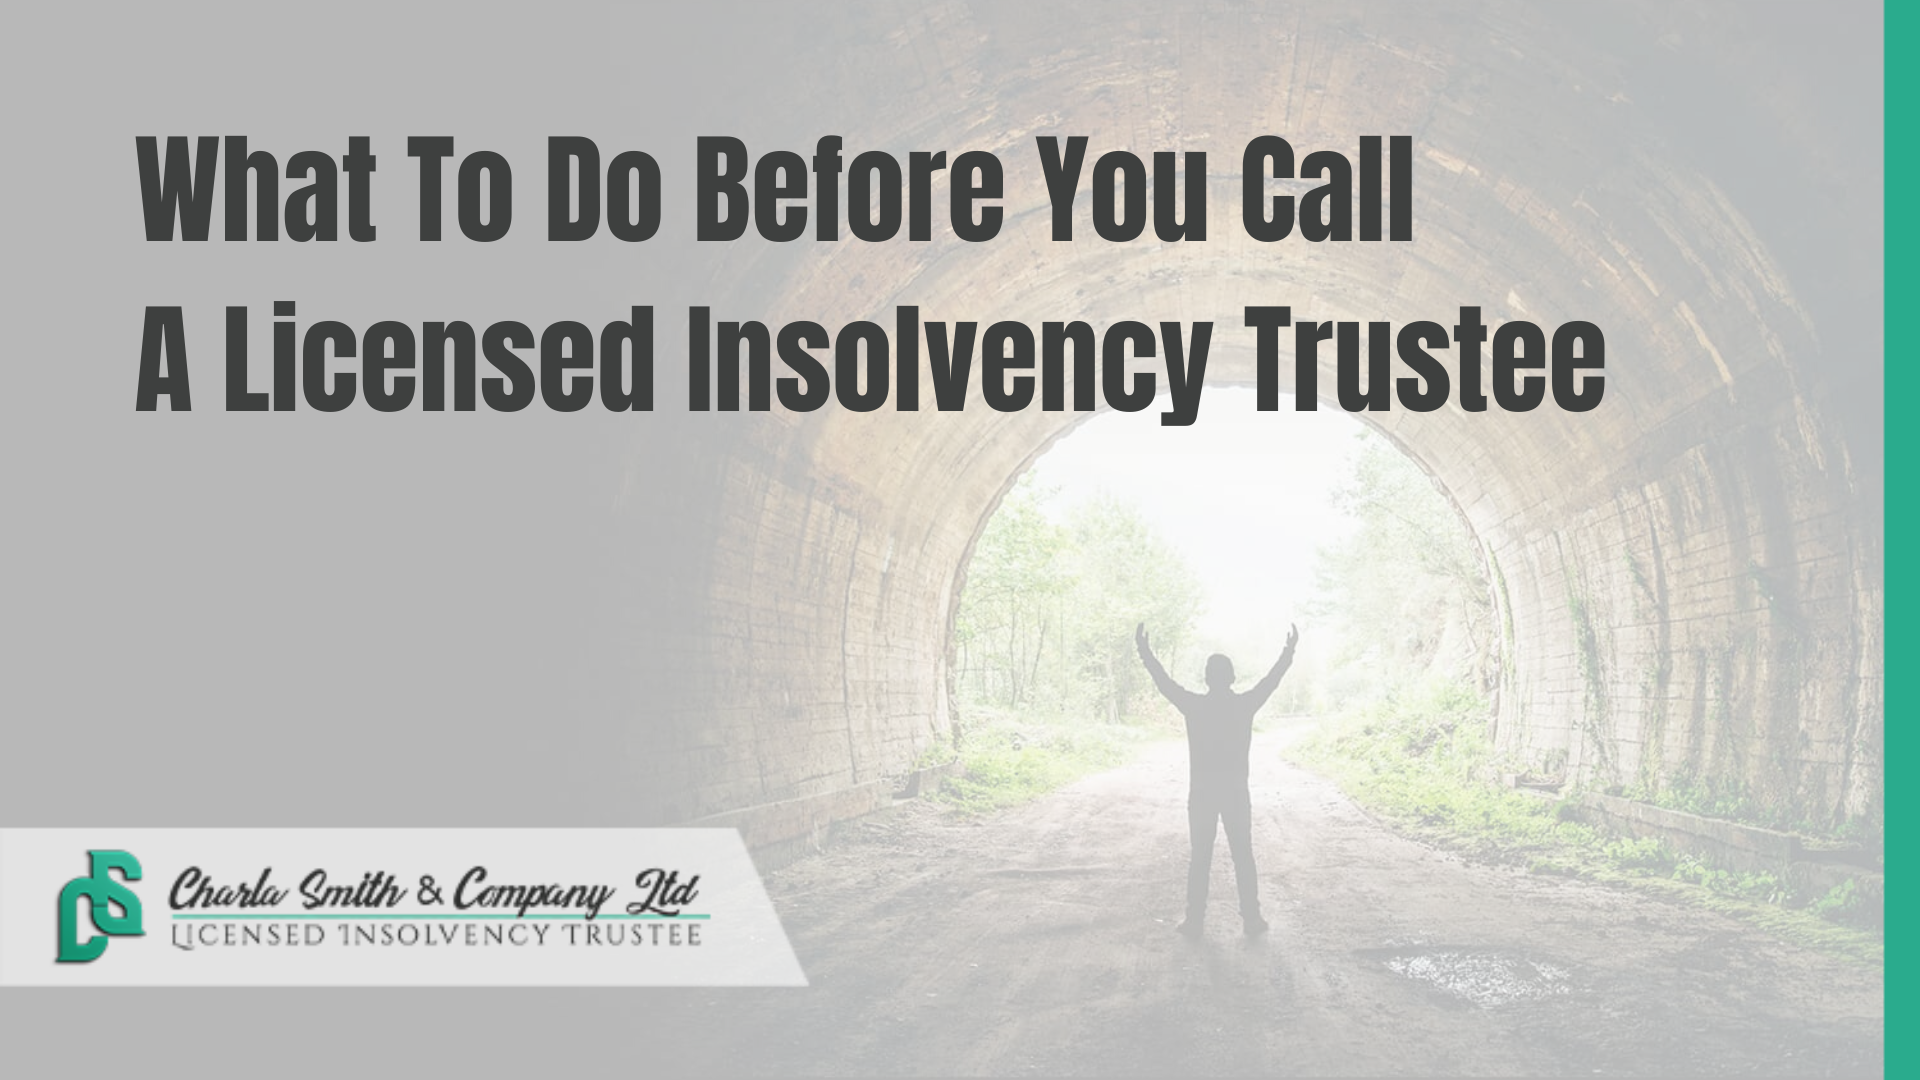 What To Do Before You Call A Licensed Insolvency Trustee